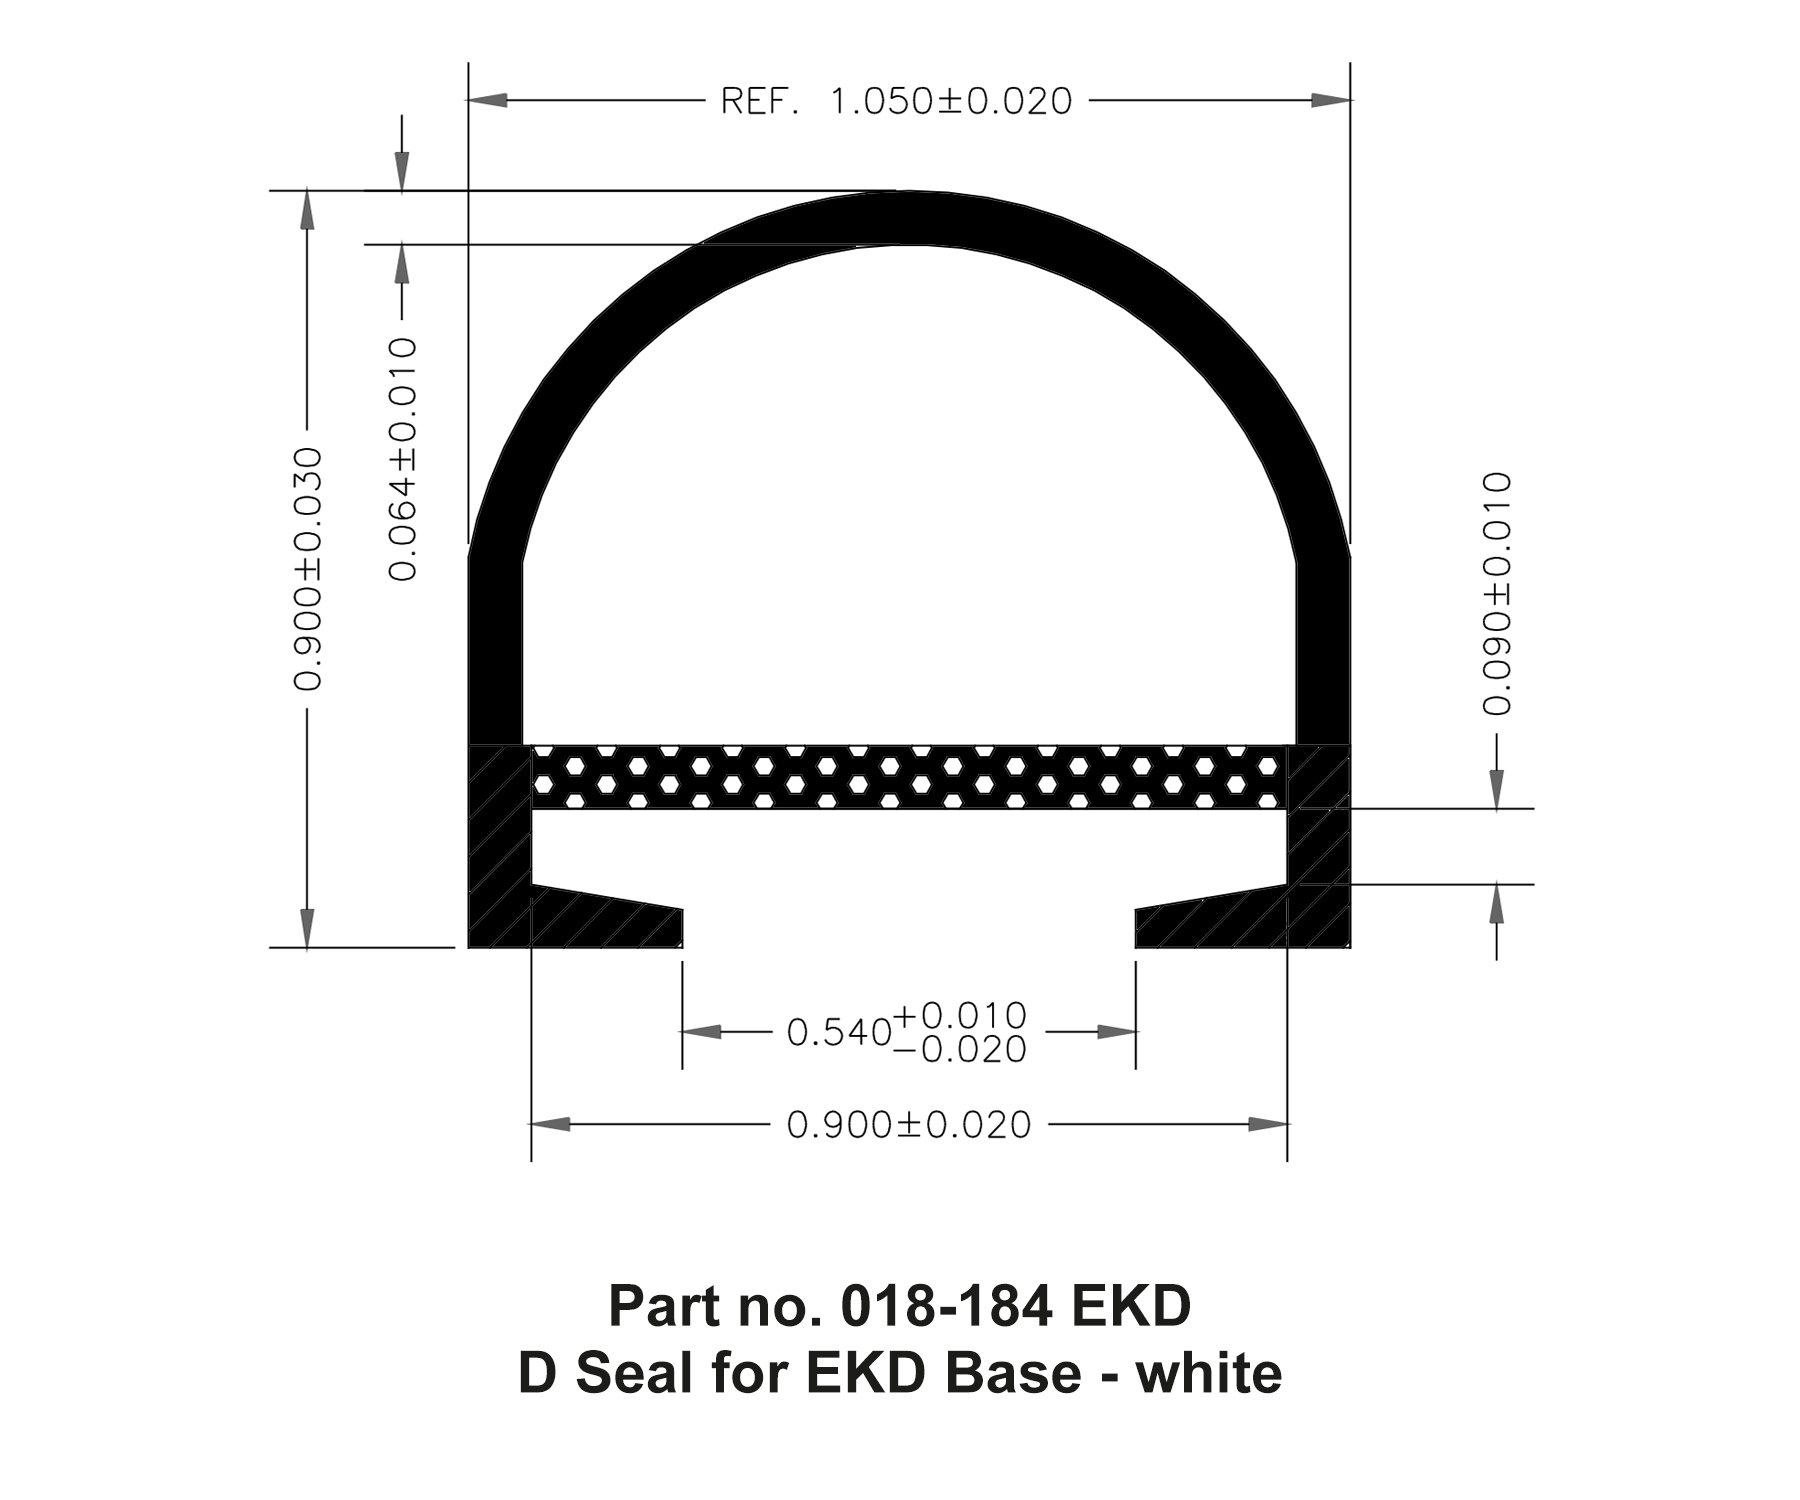 AP Products 018-184-EKD White 1 Inch x 15/16 Inch x 35 Foot D Seal